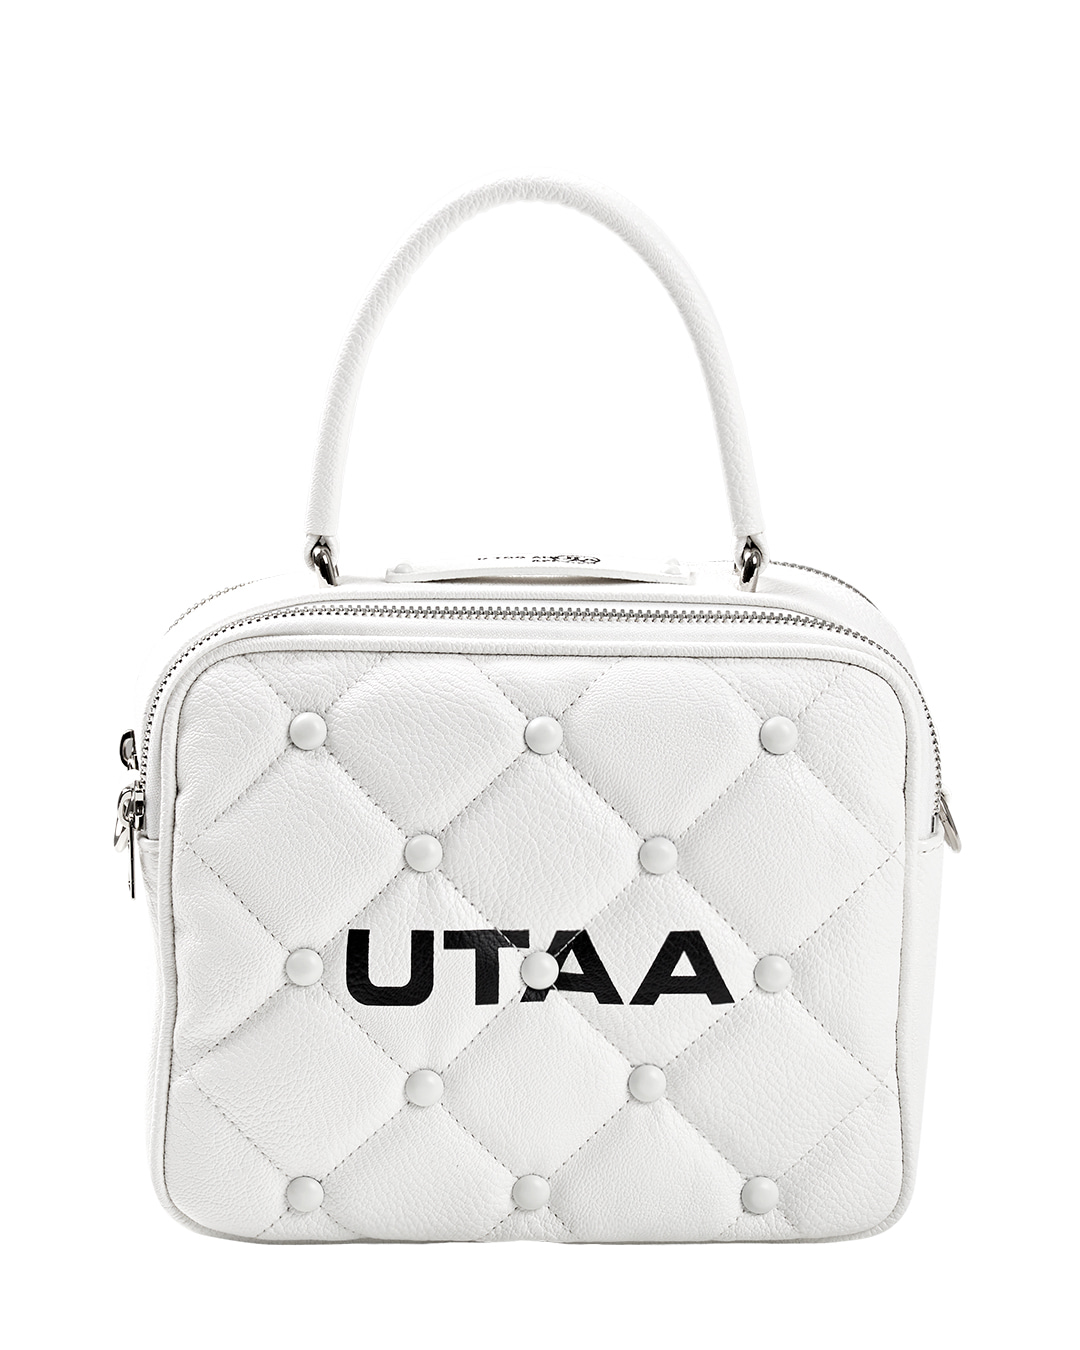 UTAA Quilting Pouch Bag : White (UD0GAU103WH)